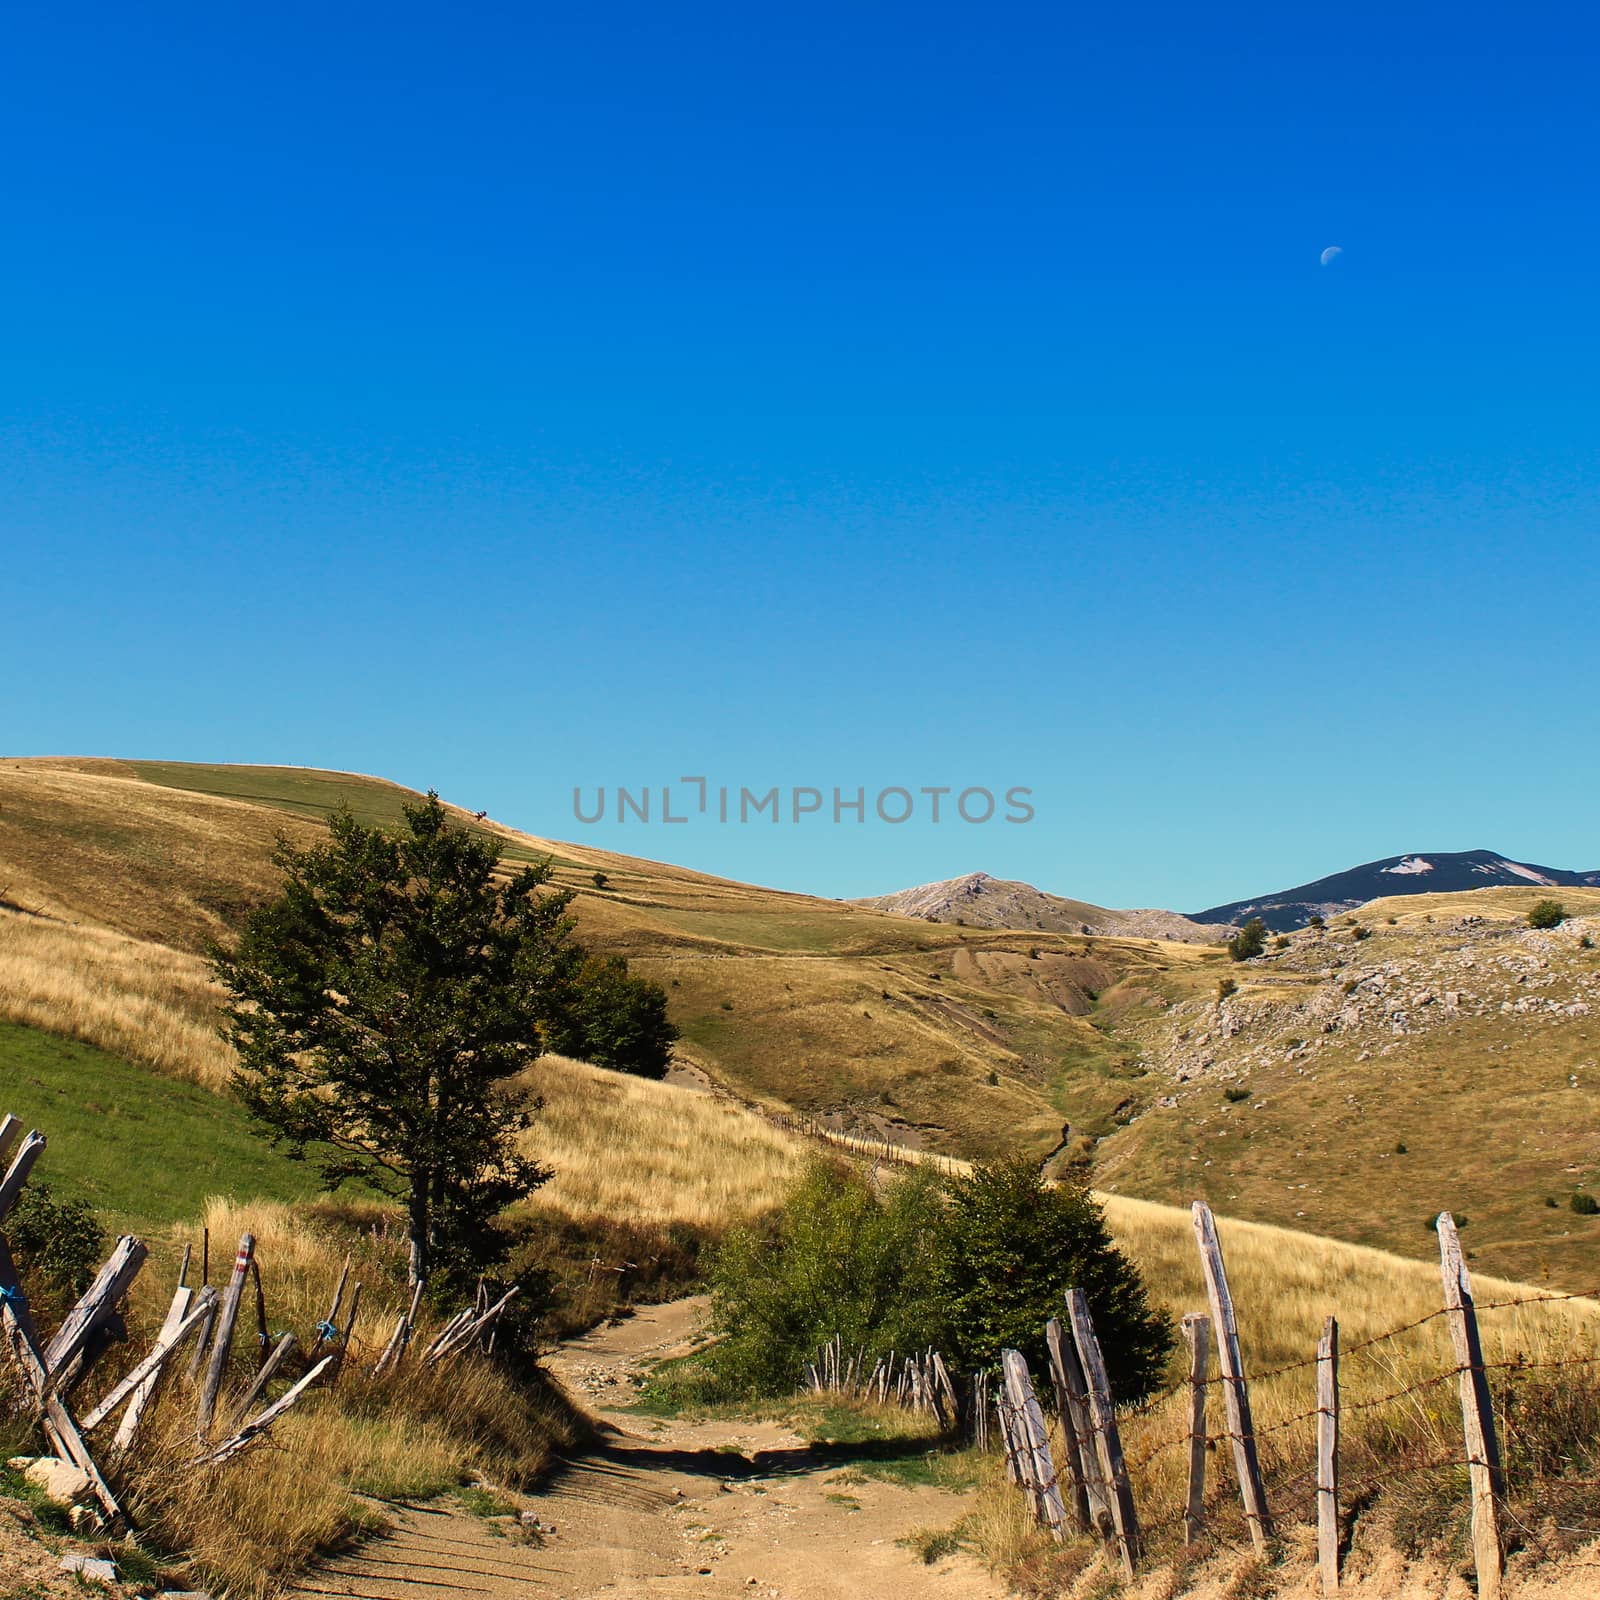 An old mountain road with an old fence, a tree on the side and mountain peaks in the distance. Bjelasnica Mountain, Bosnia and Herzegovina.